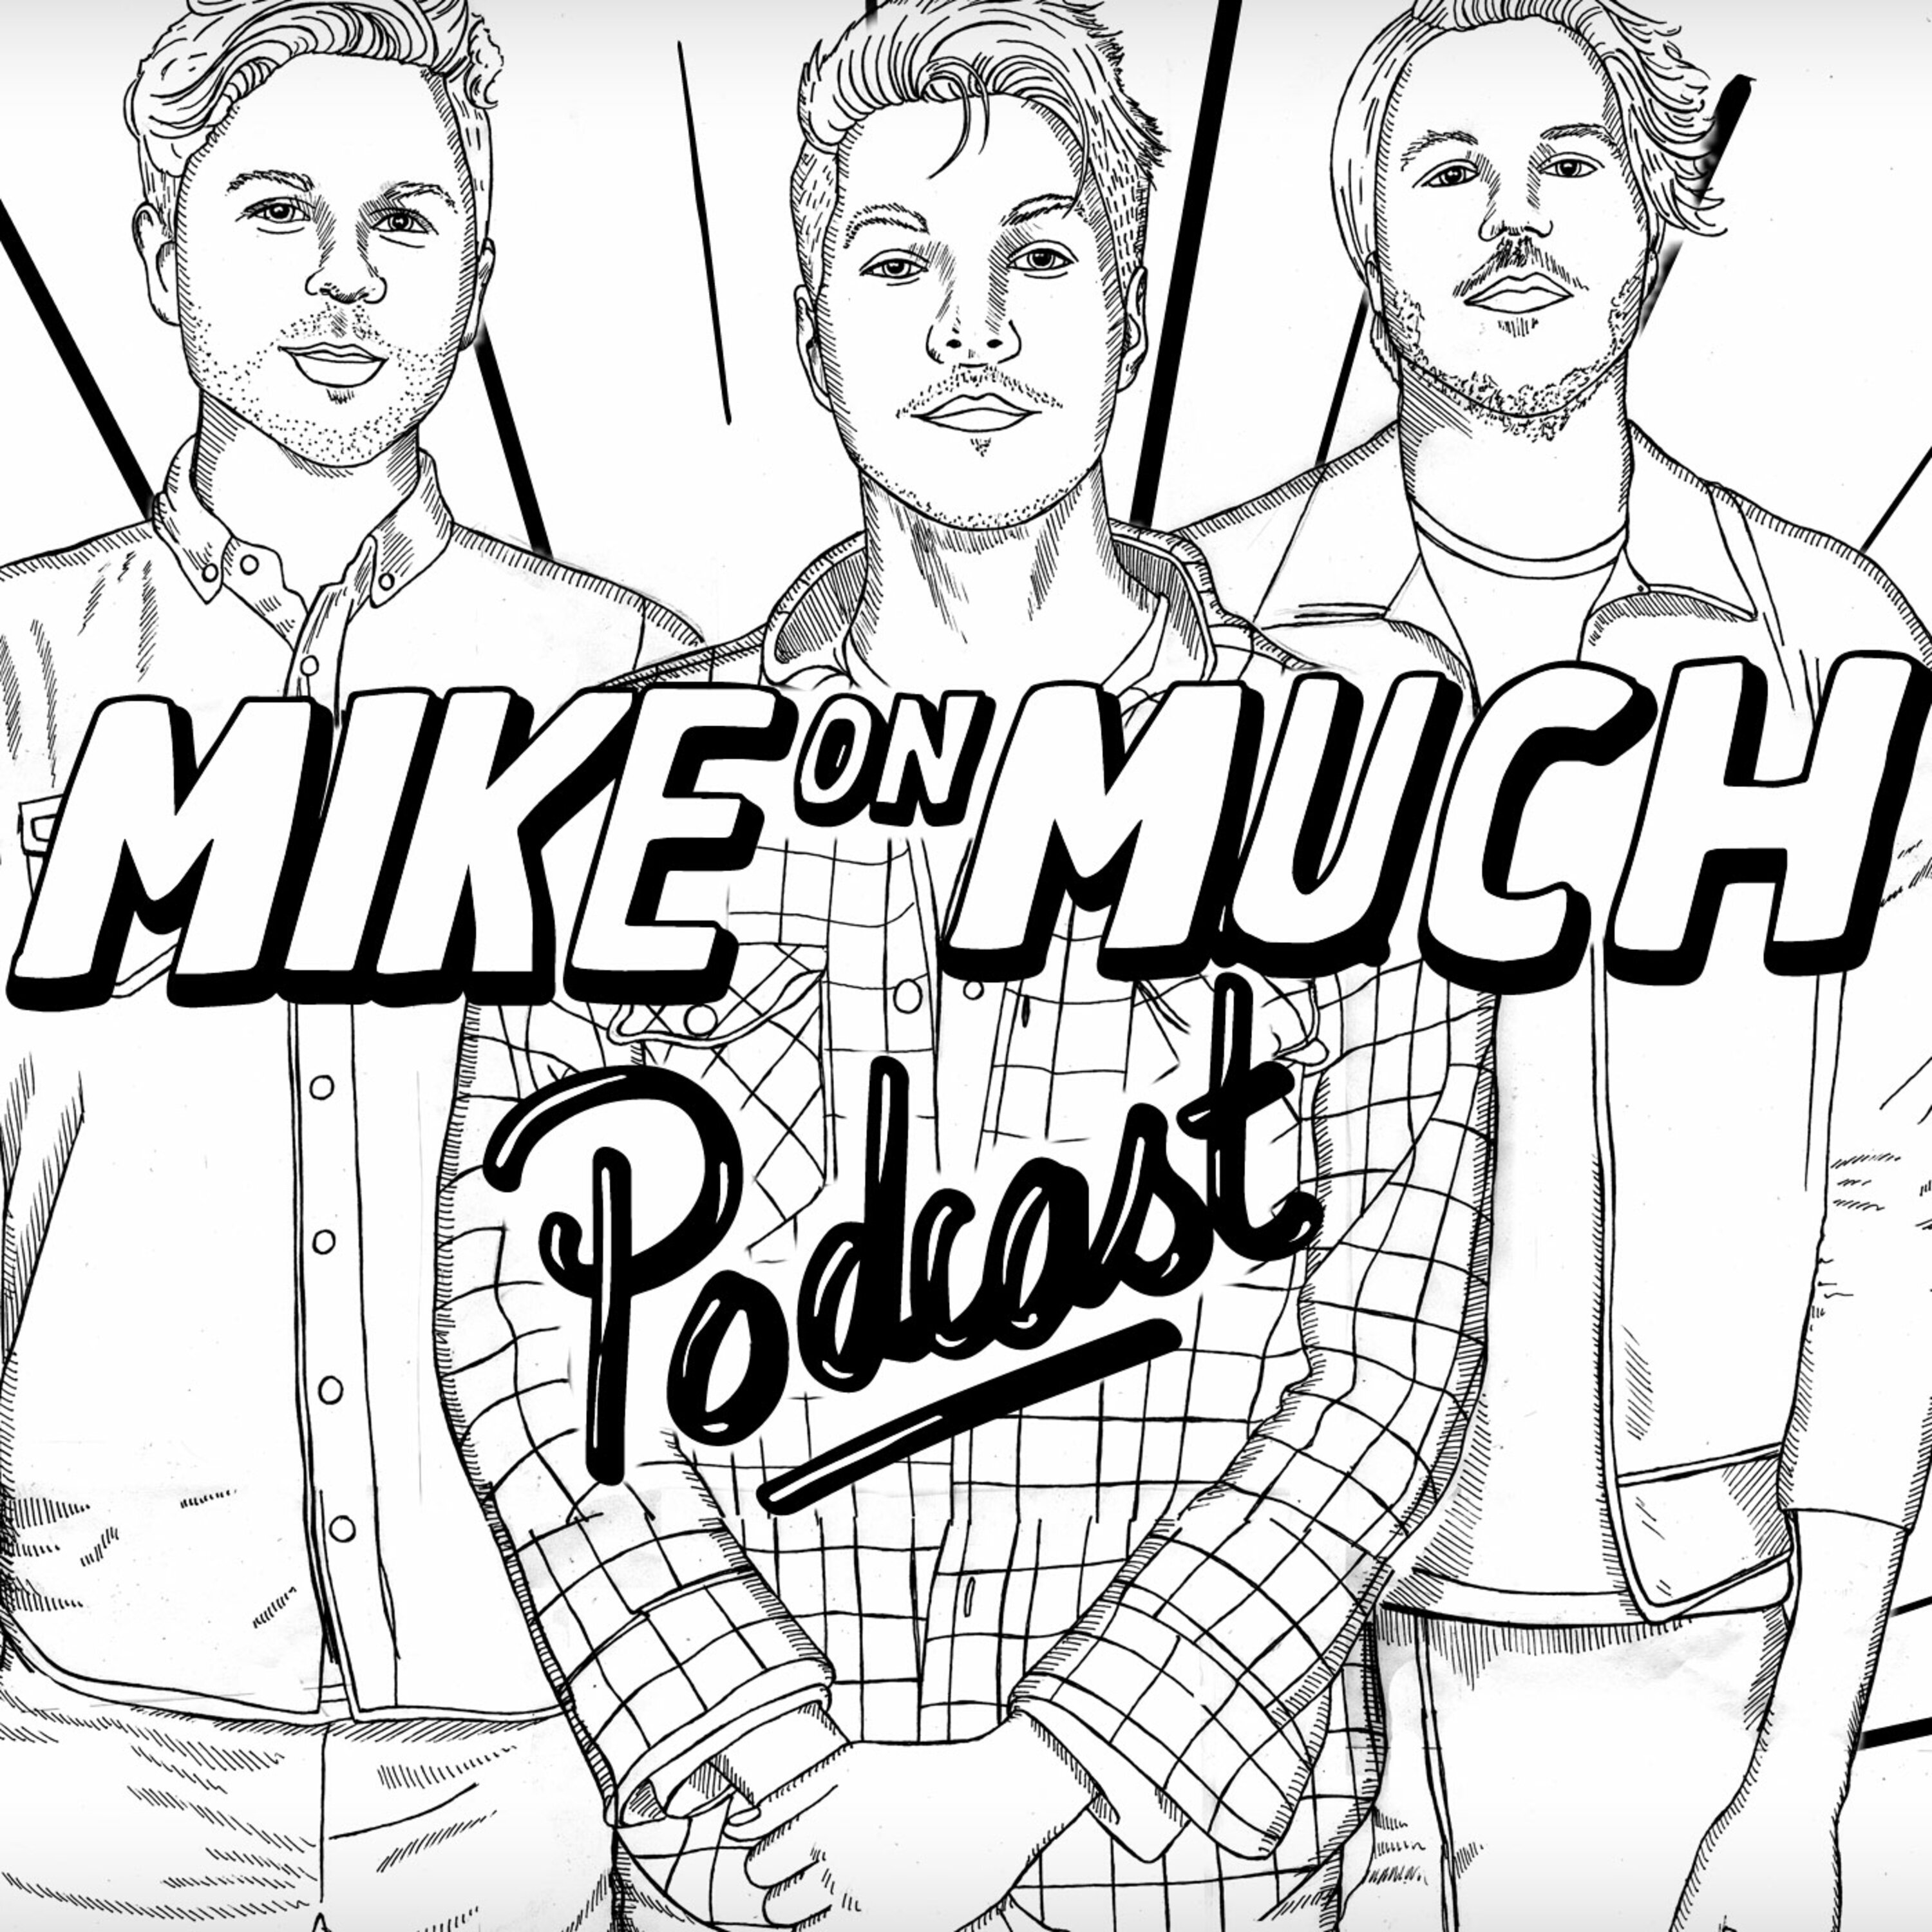 Season 1 Mike On Much: Did He Ever Get The Cucumbers?